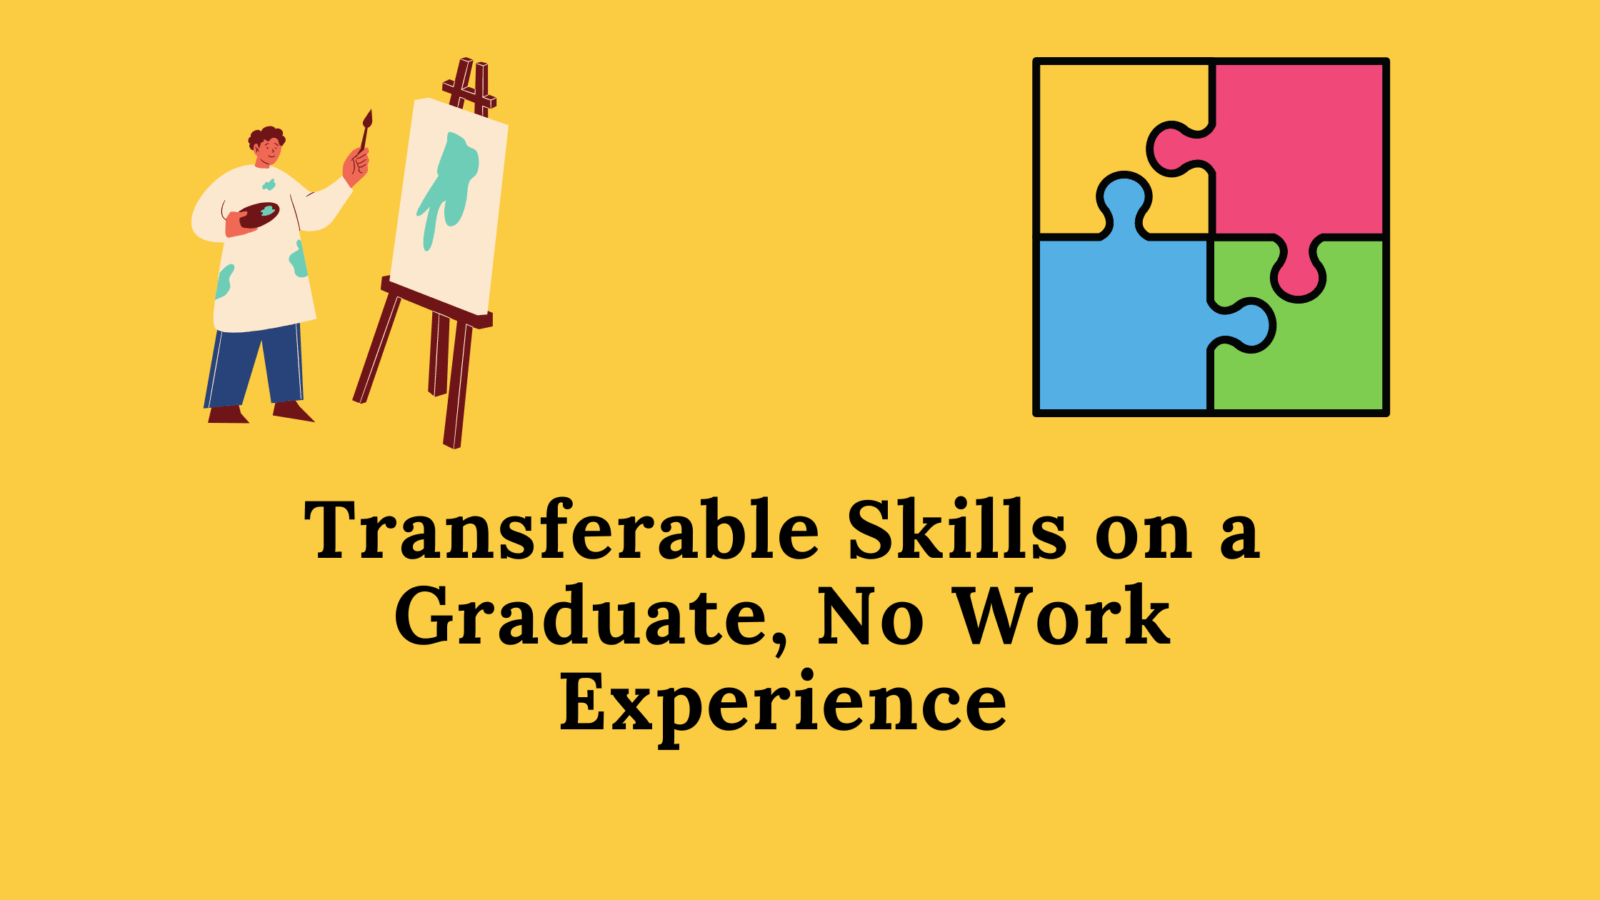 Transferable Skills on a Graduate, No Work Experience